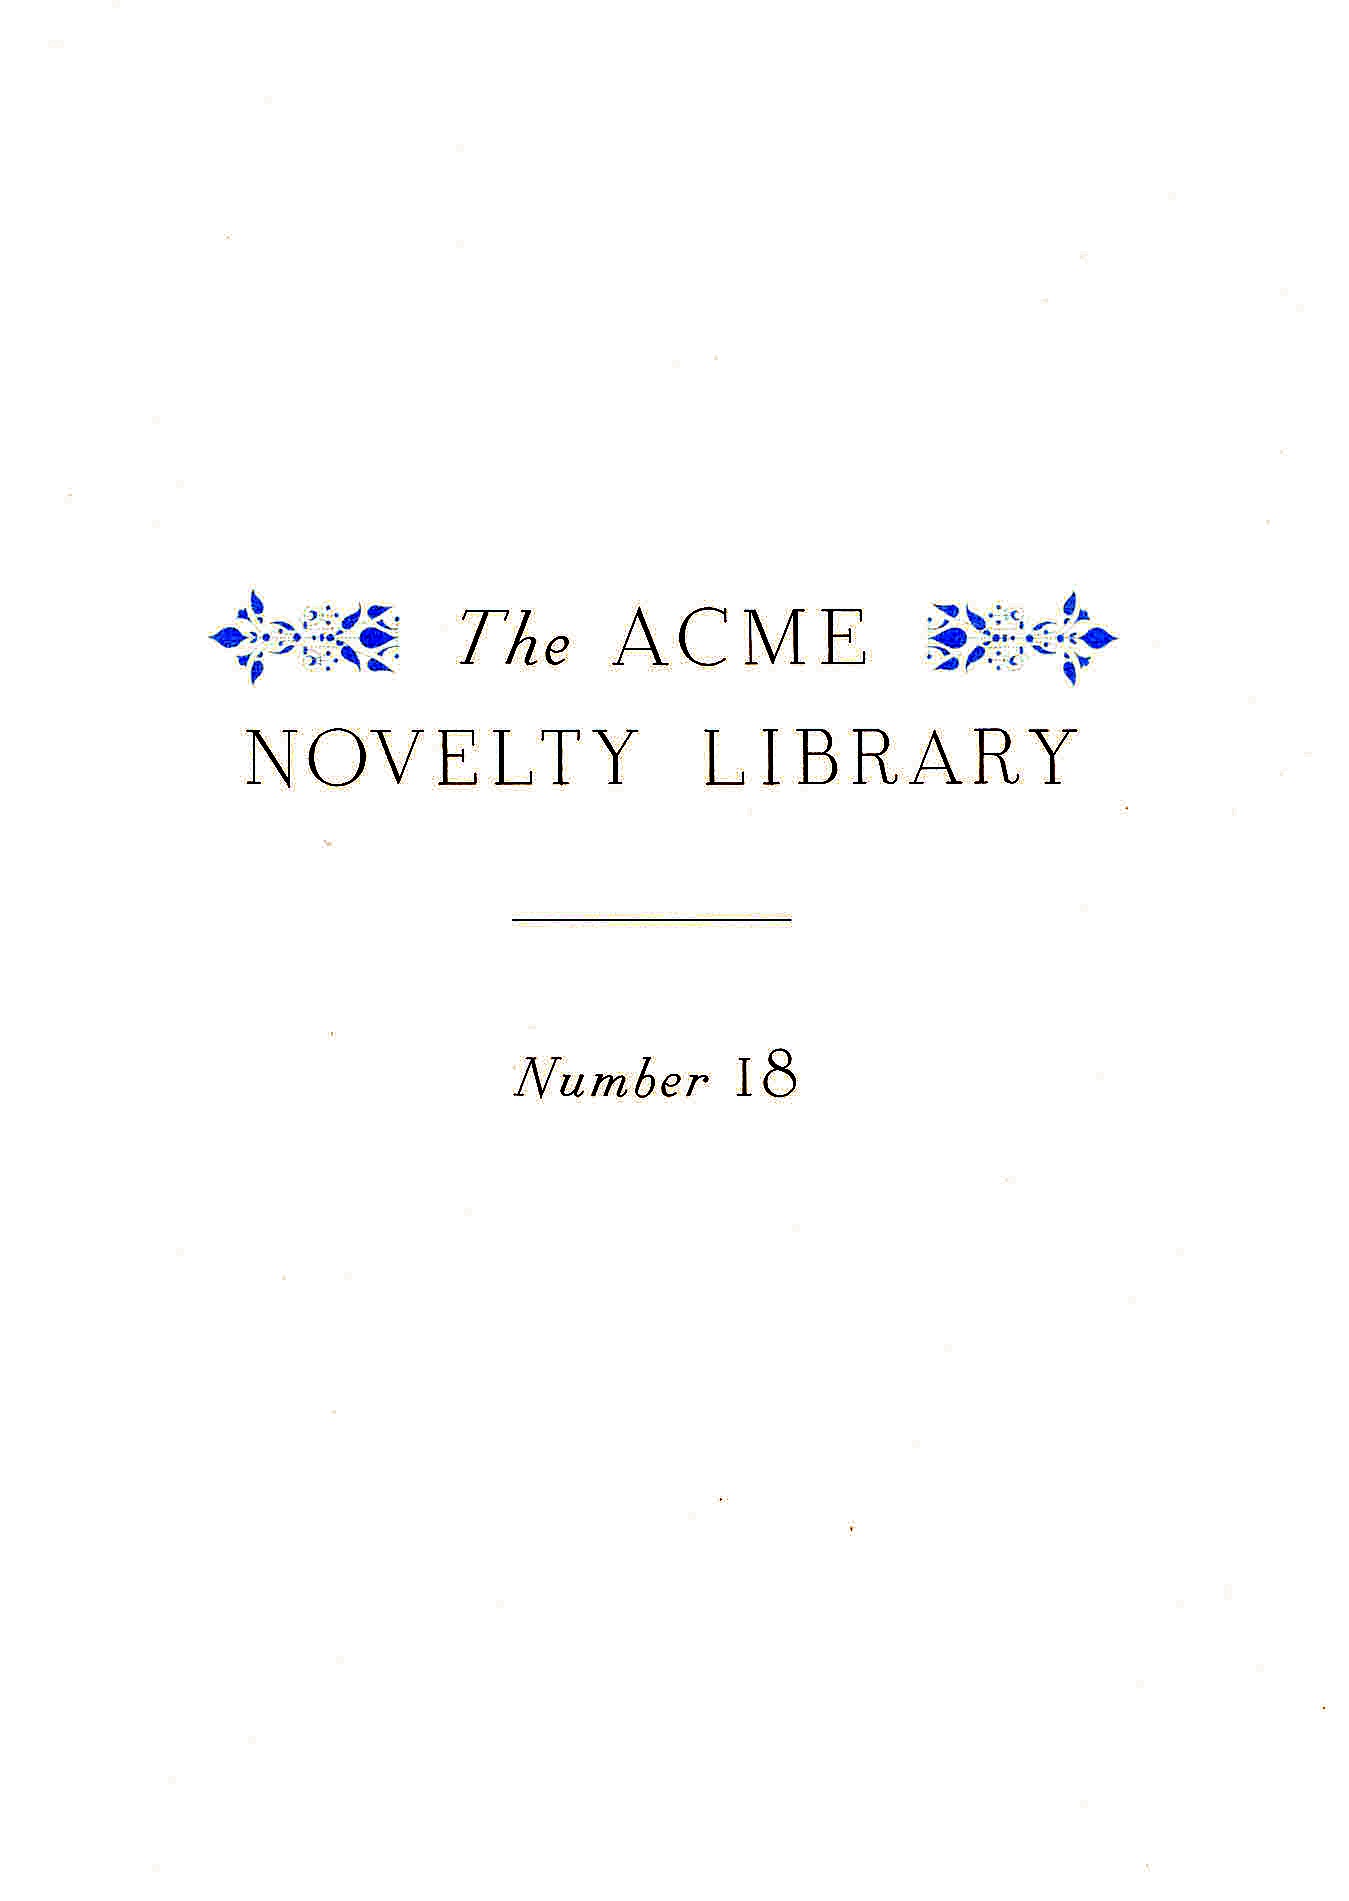 Read online The Acme Novelty Library comic -  Issue #18 - 6